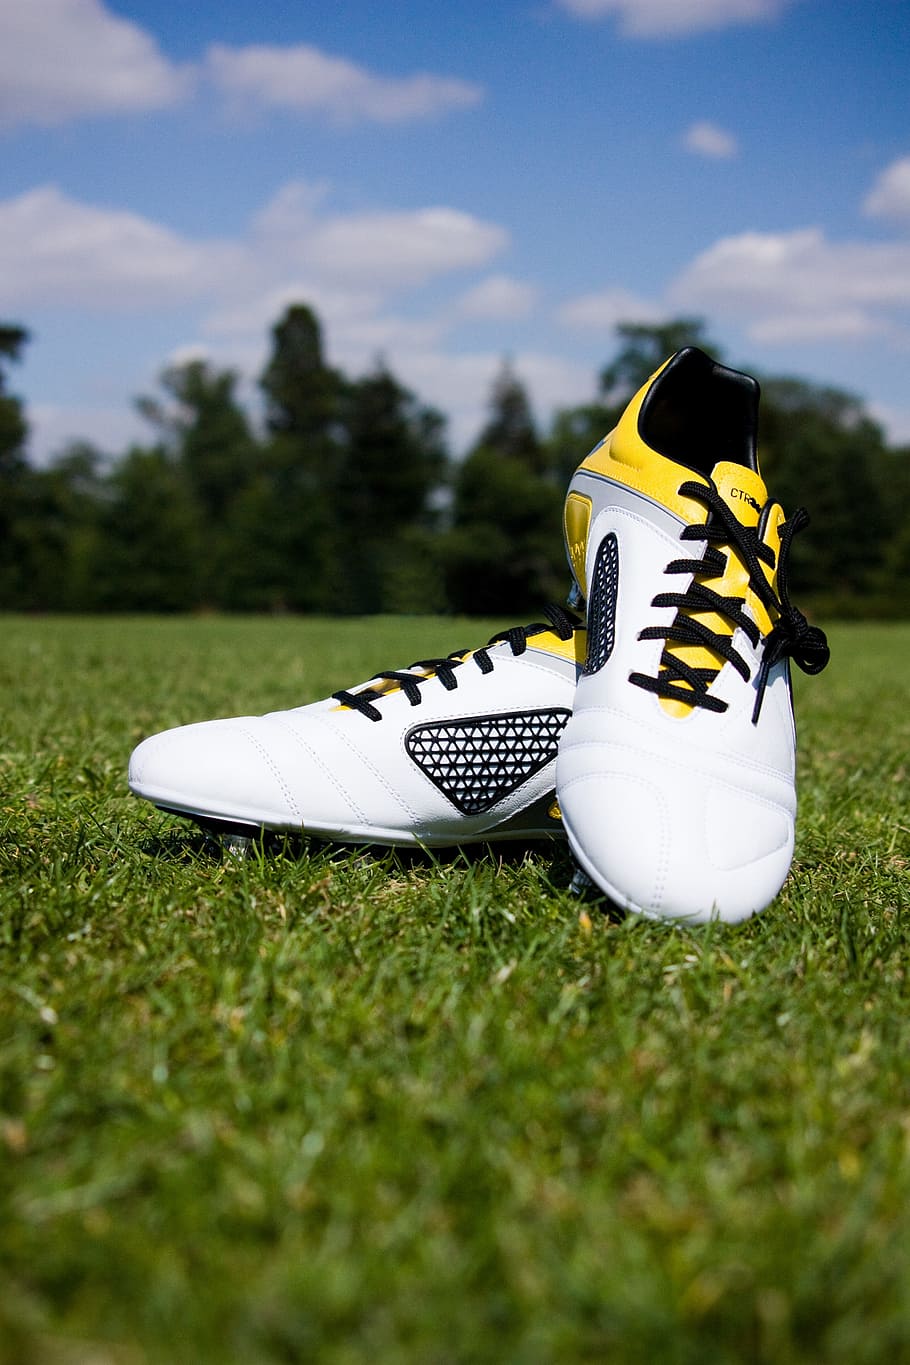 pair of white-and-yellow cleats on green grass, Football, Boots